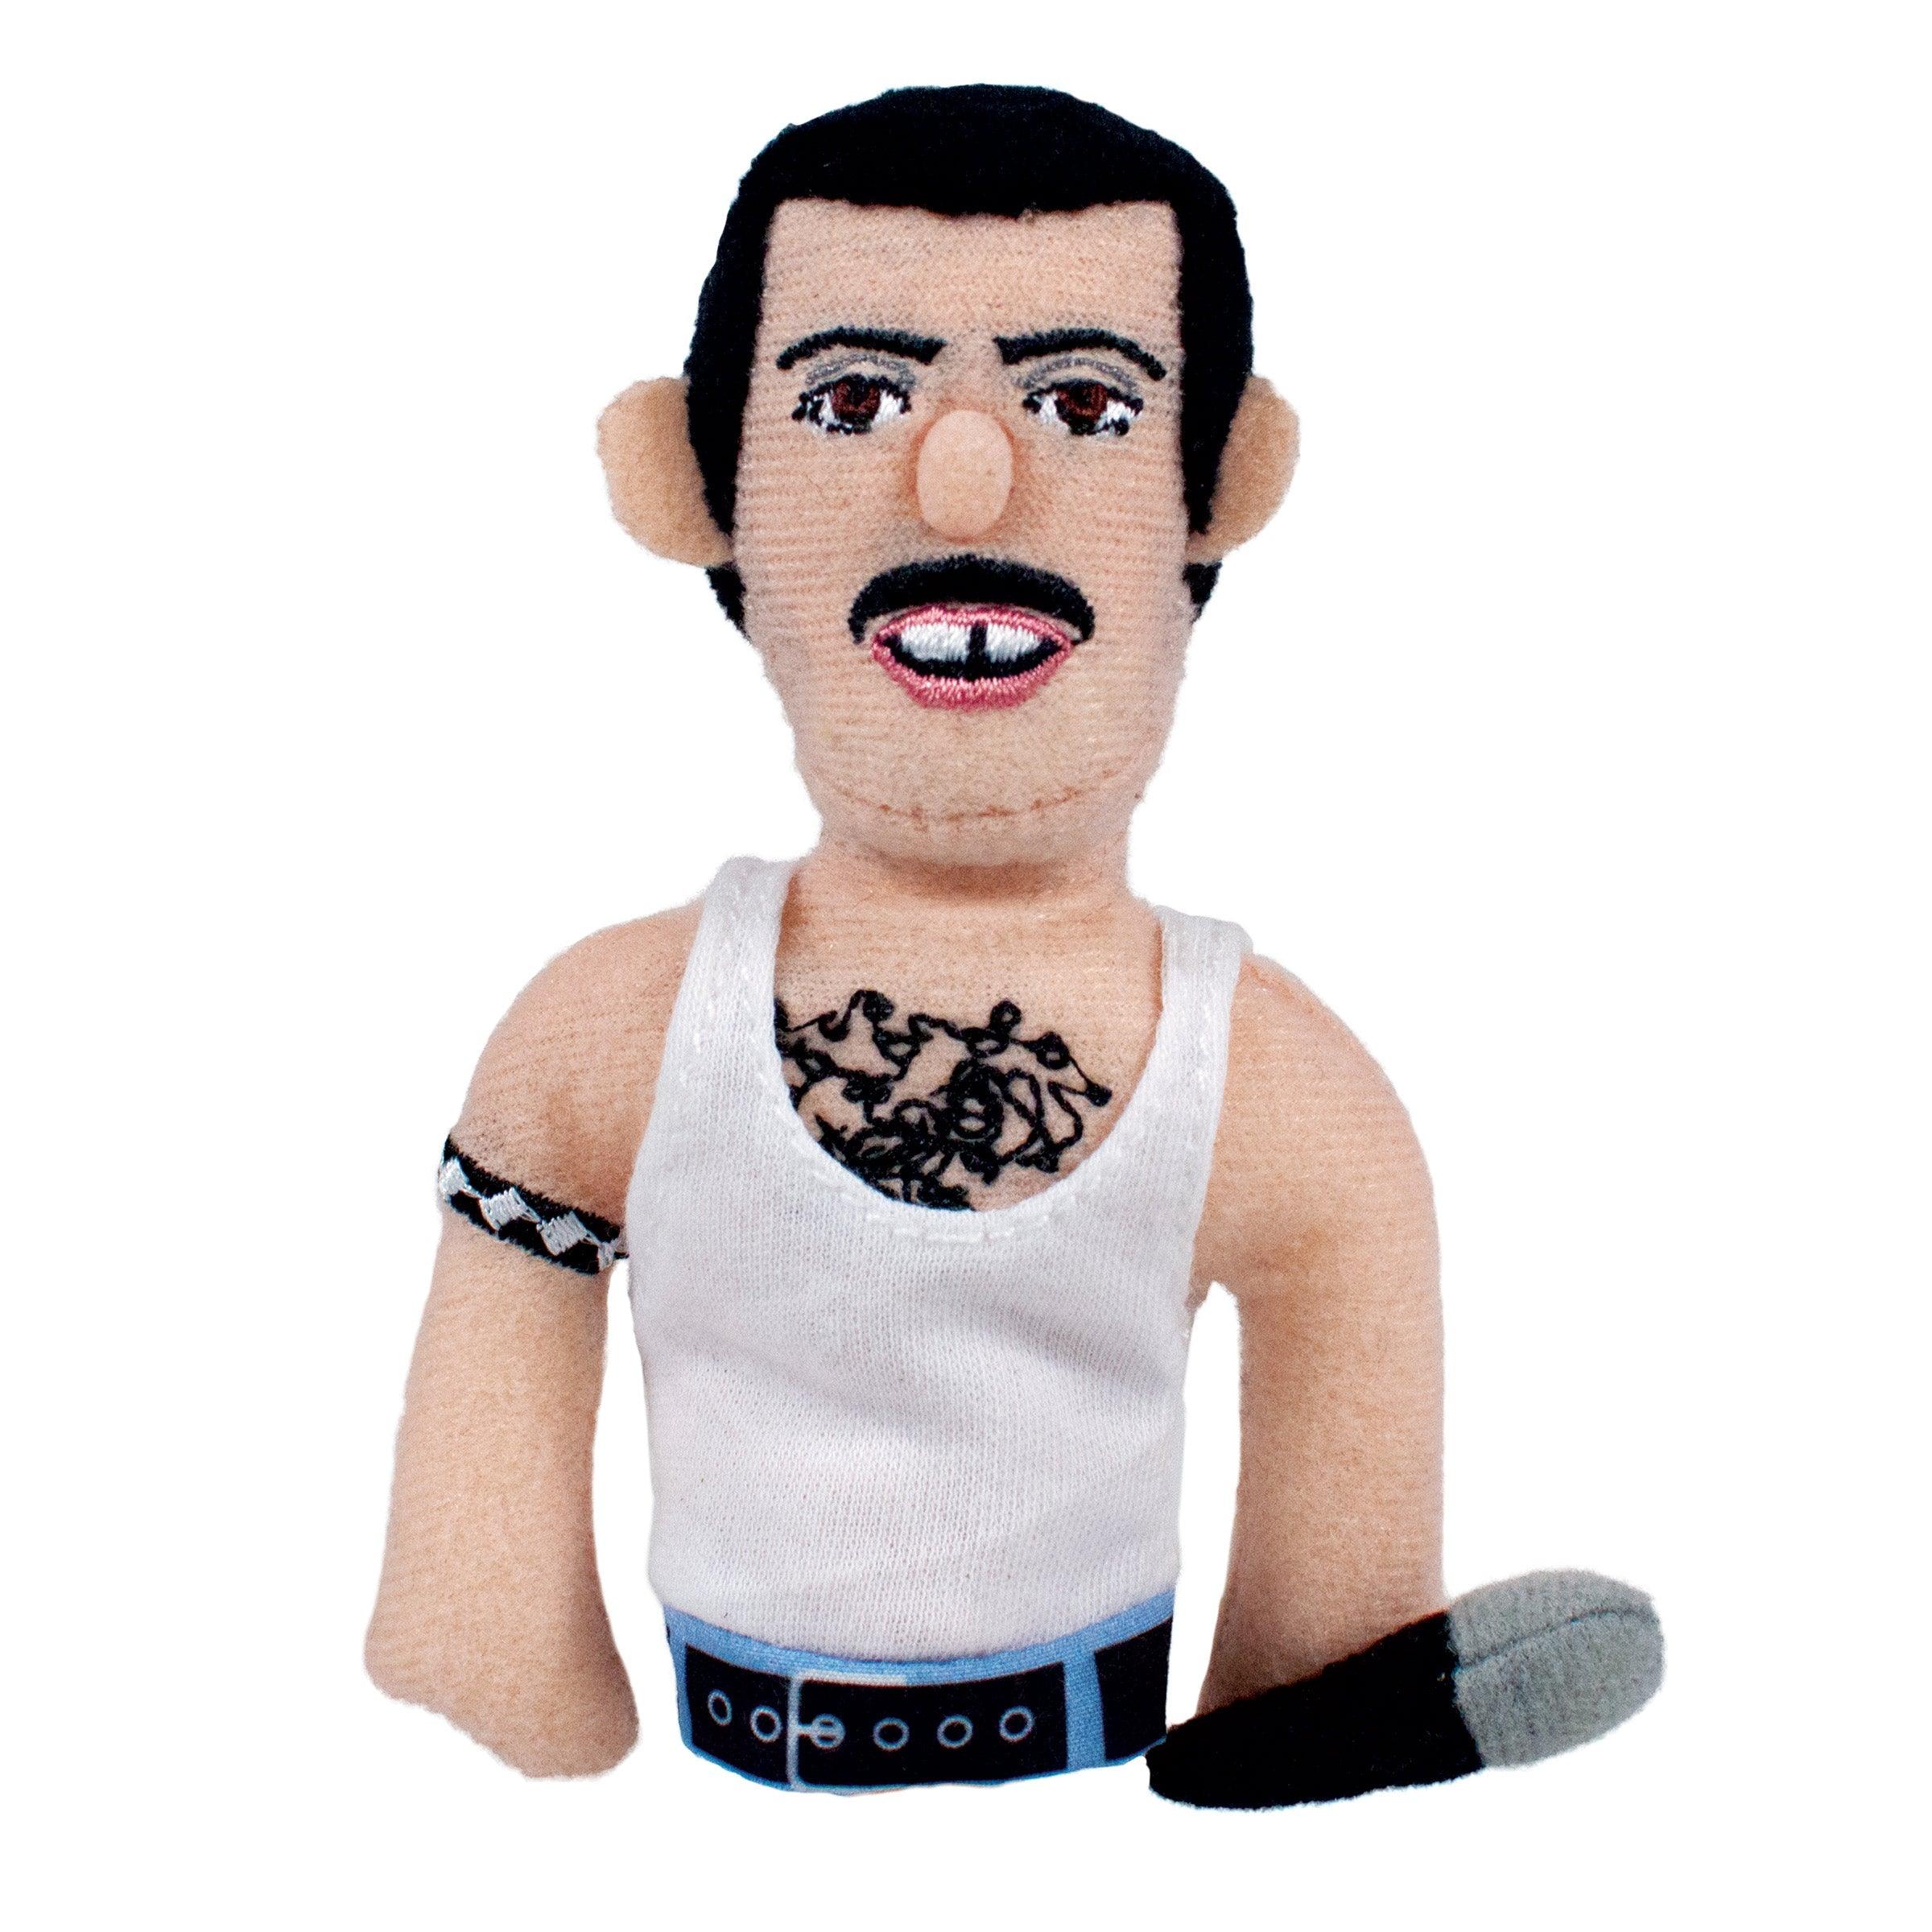 Product photo of Freddie Mercury Finger Puppet, a novelty gift manufactured by The Unemployed Philosophers Guild.